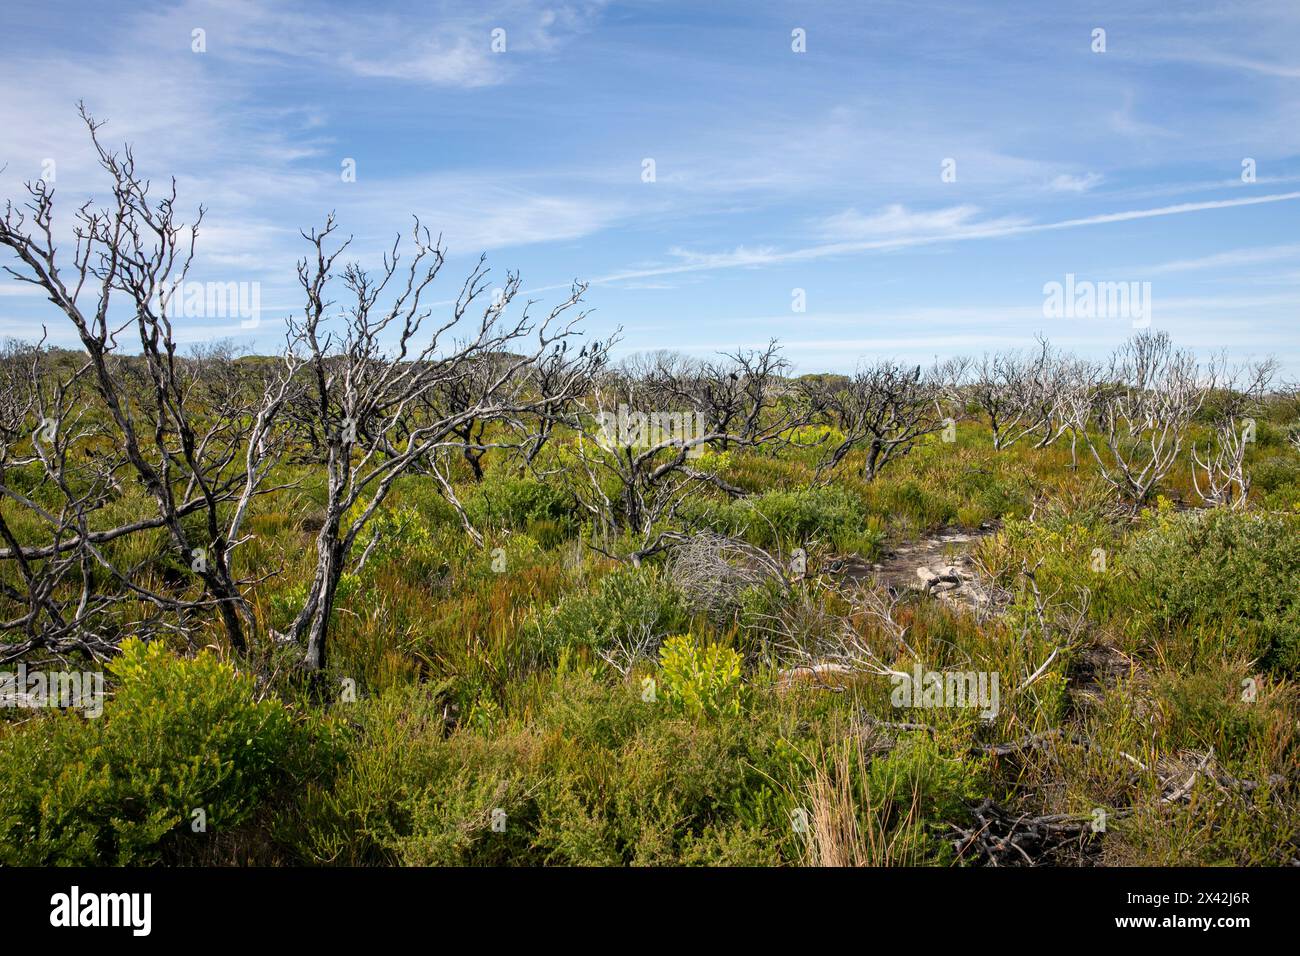 North Head Manly, view of the nature bush landscape on North Head with native plants and blue sky,Sydney,NSW,Australia Stock Photo